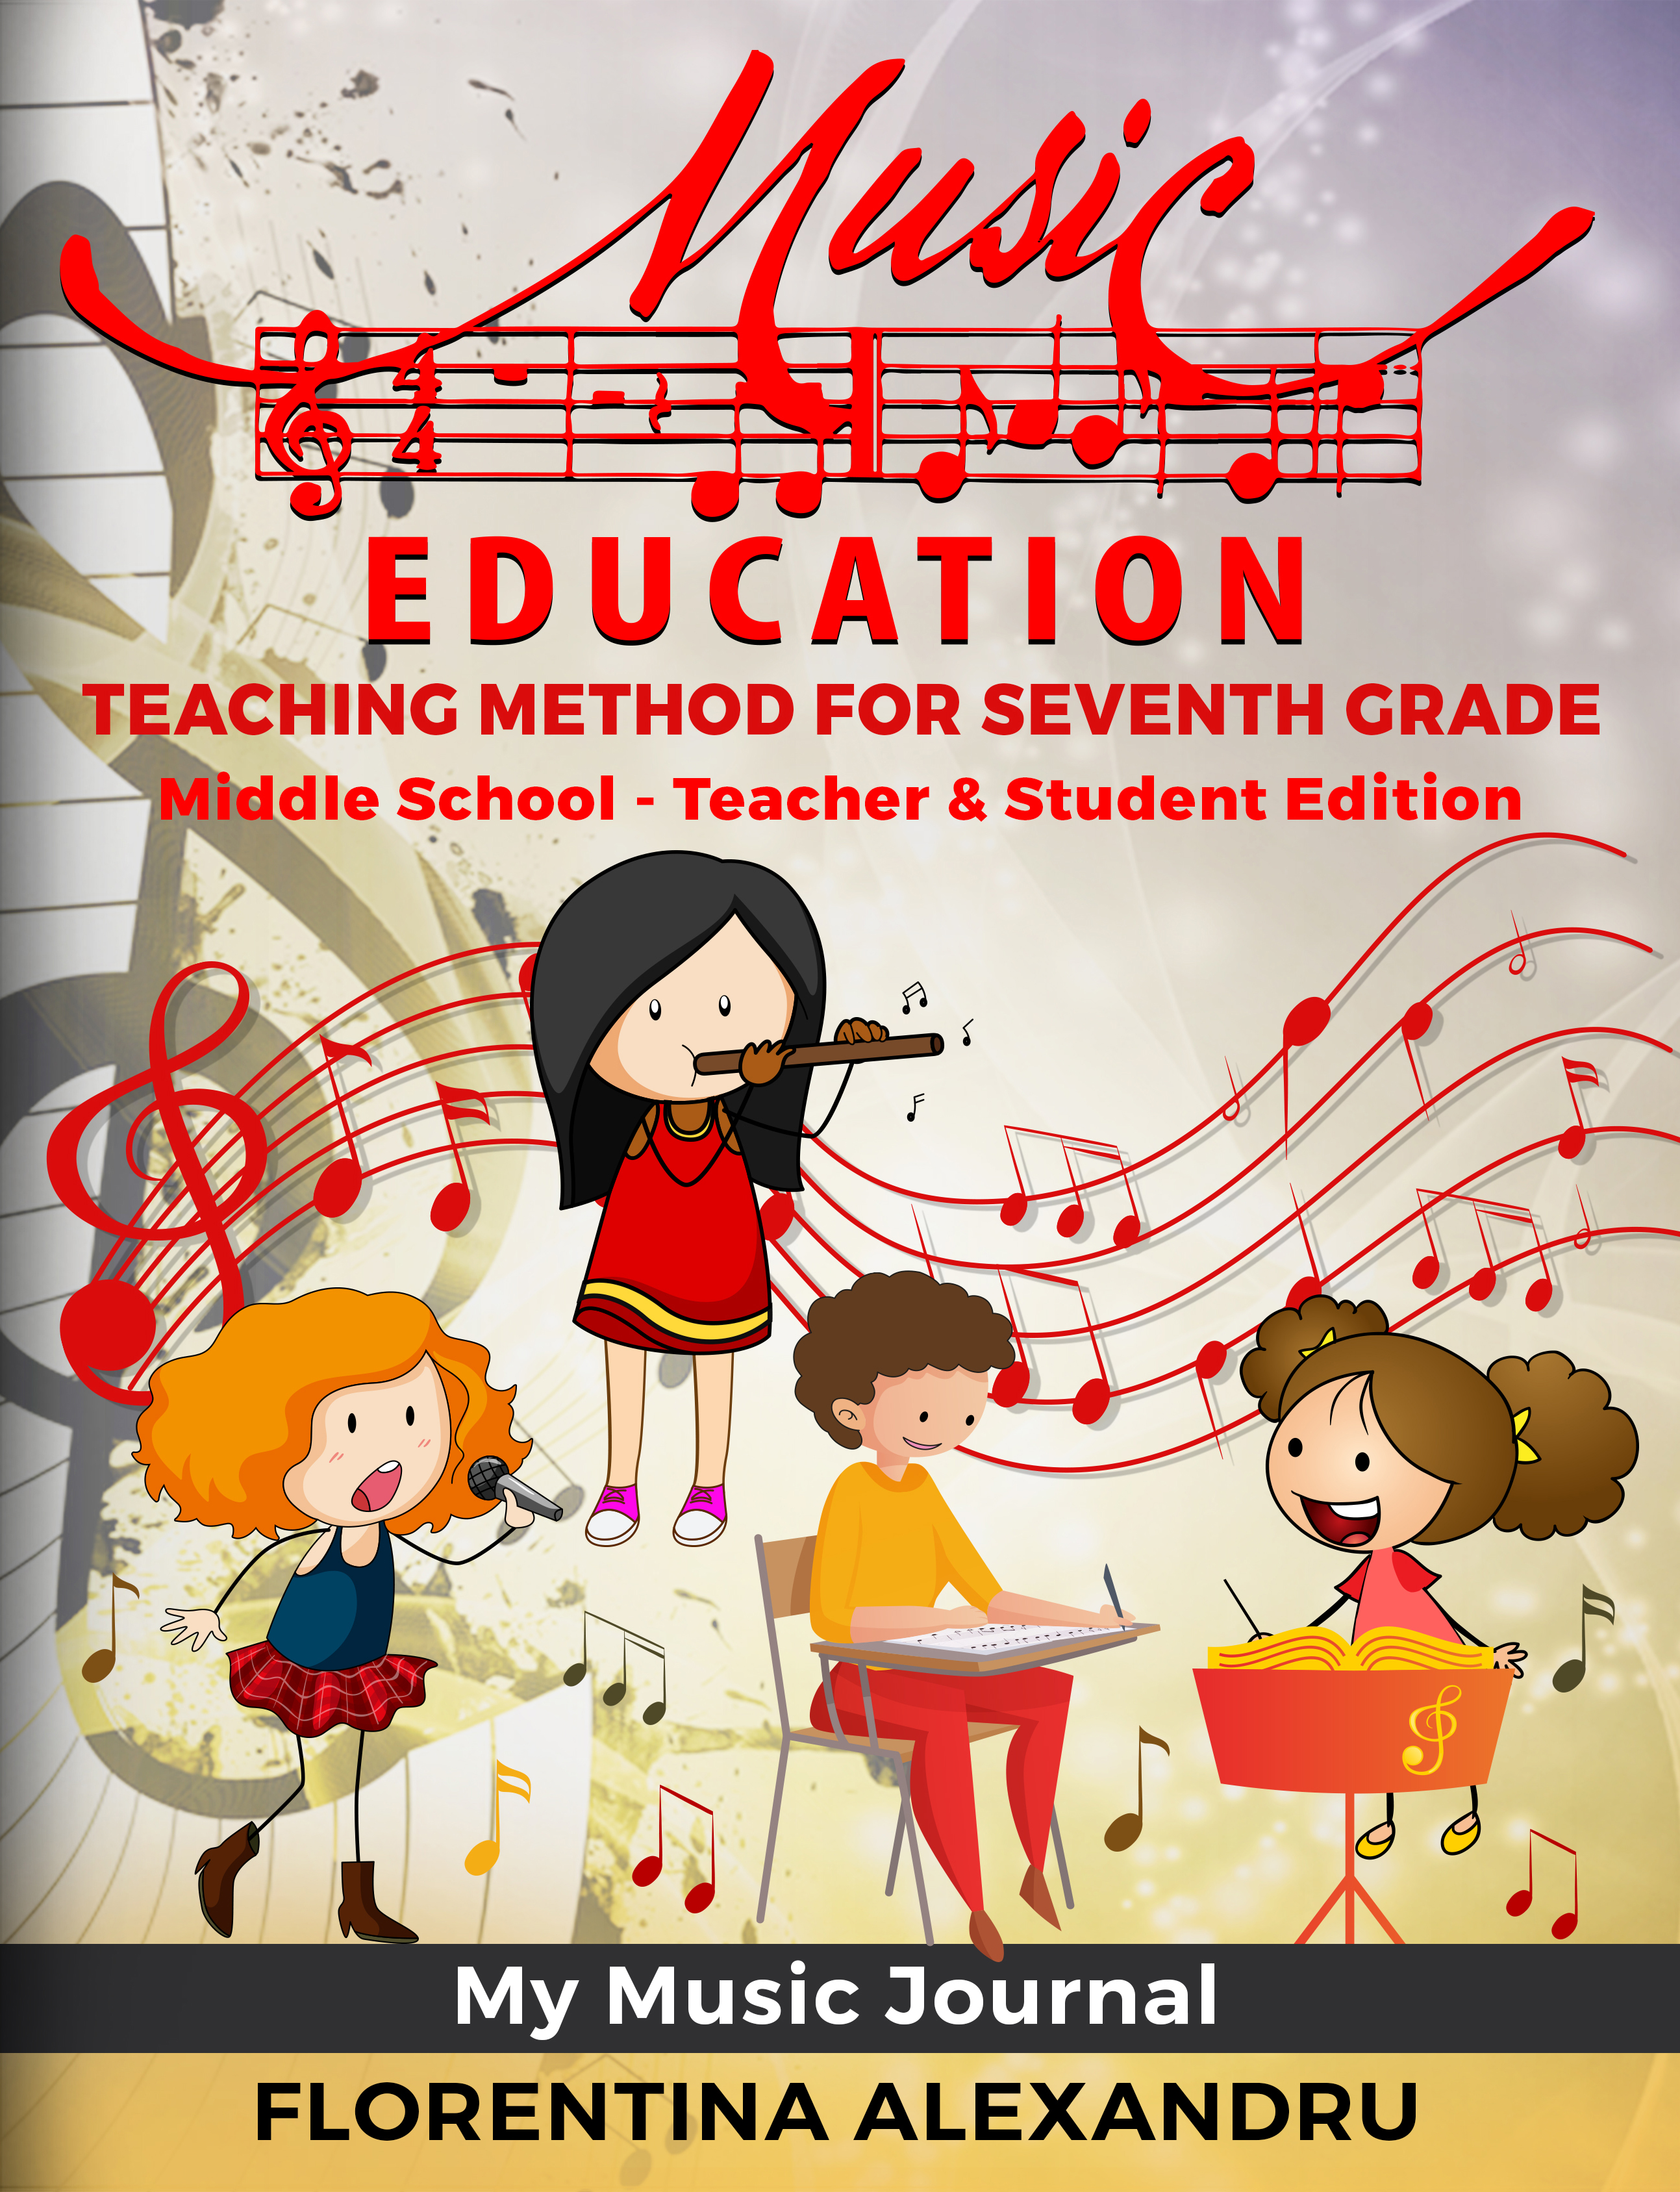 313 Music Education covers 1st-4th grade